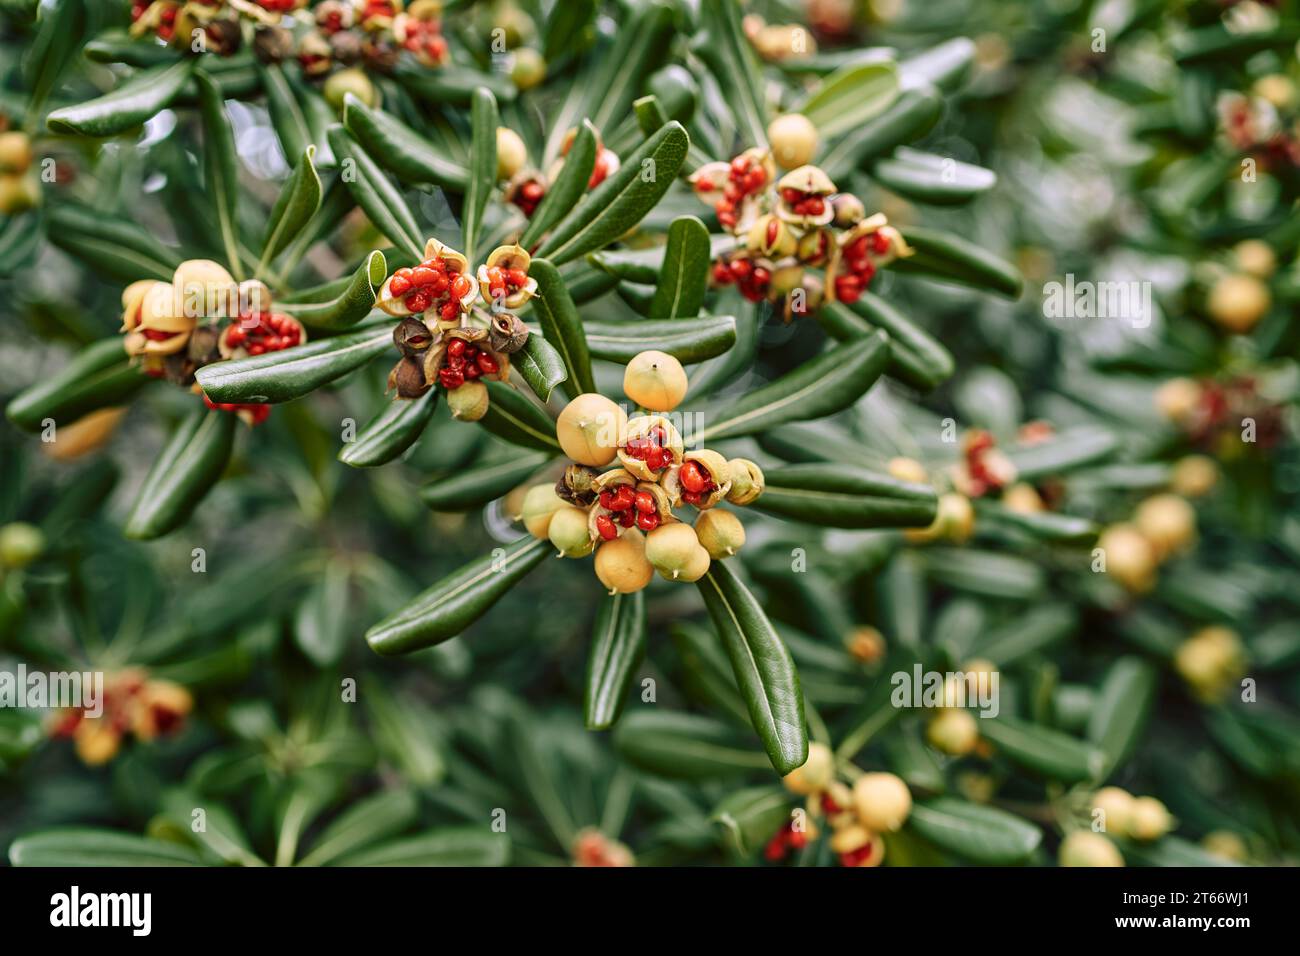 Yellow fruits with red seeds on an Australian laurel bush Stock Photo